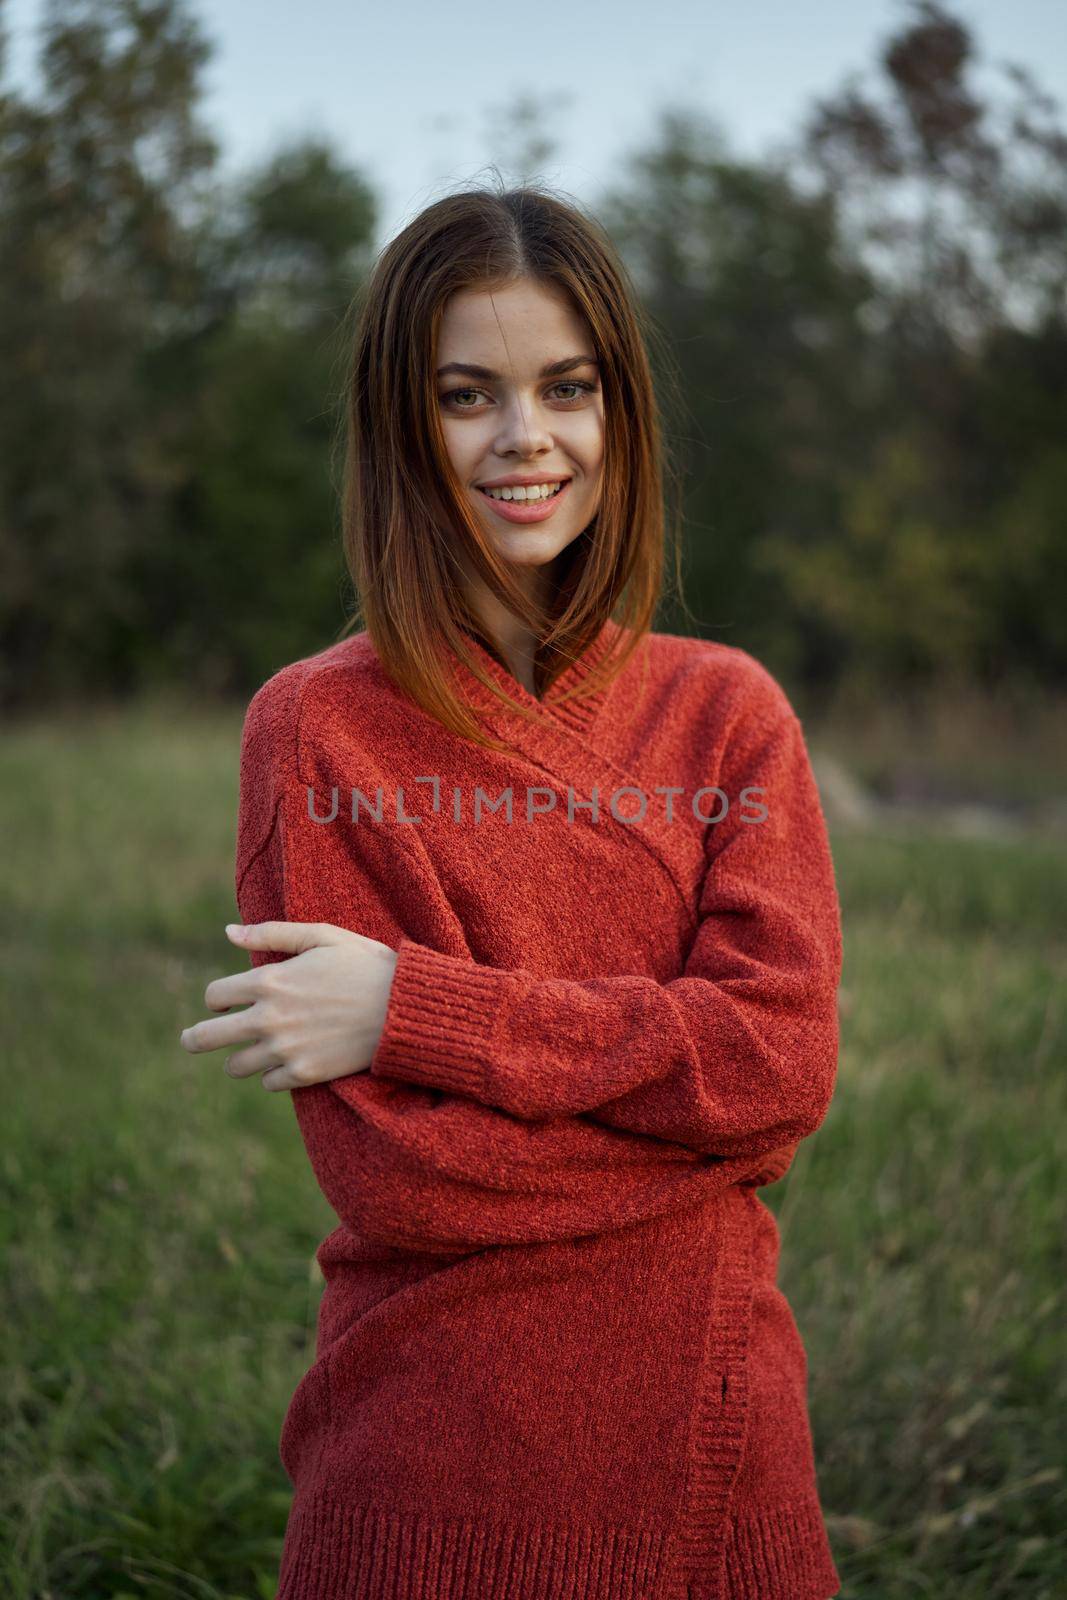 woman red sweater cool air nature romance. High quality photo